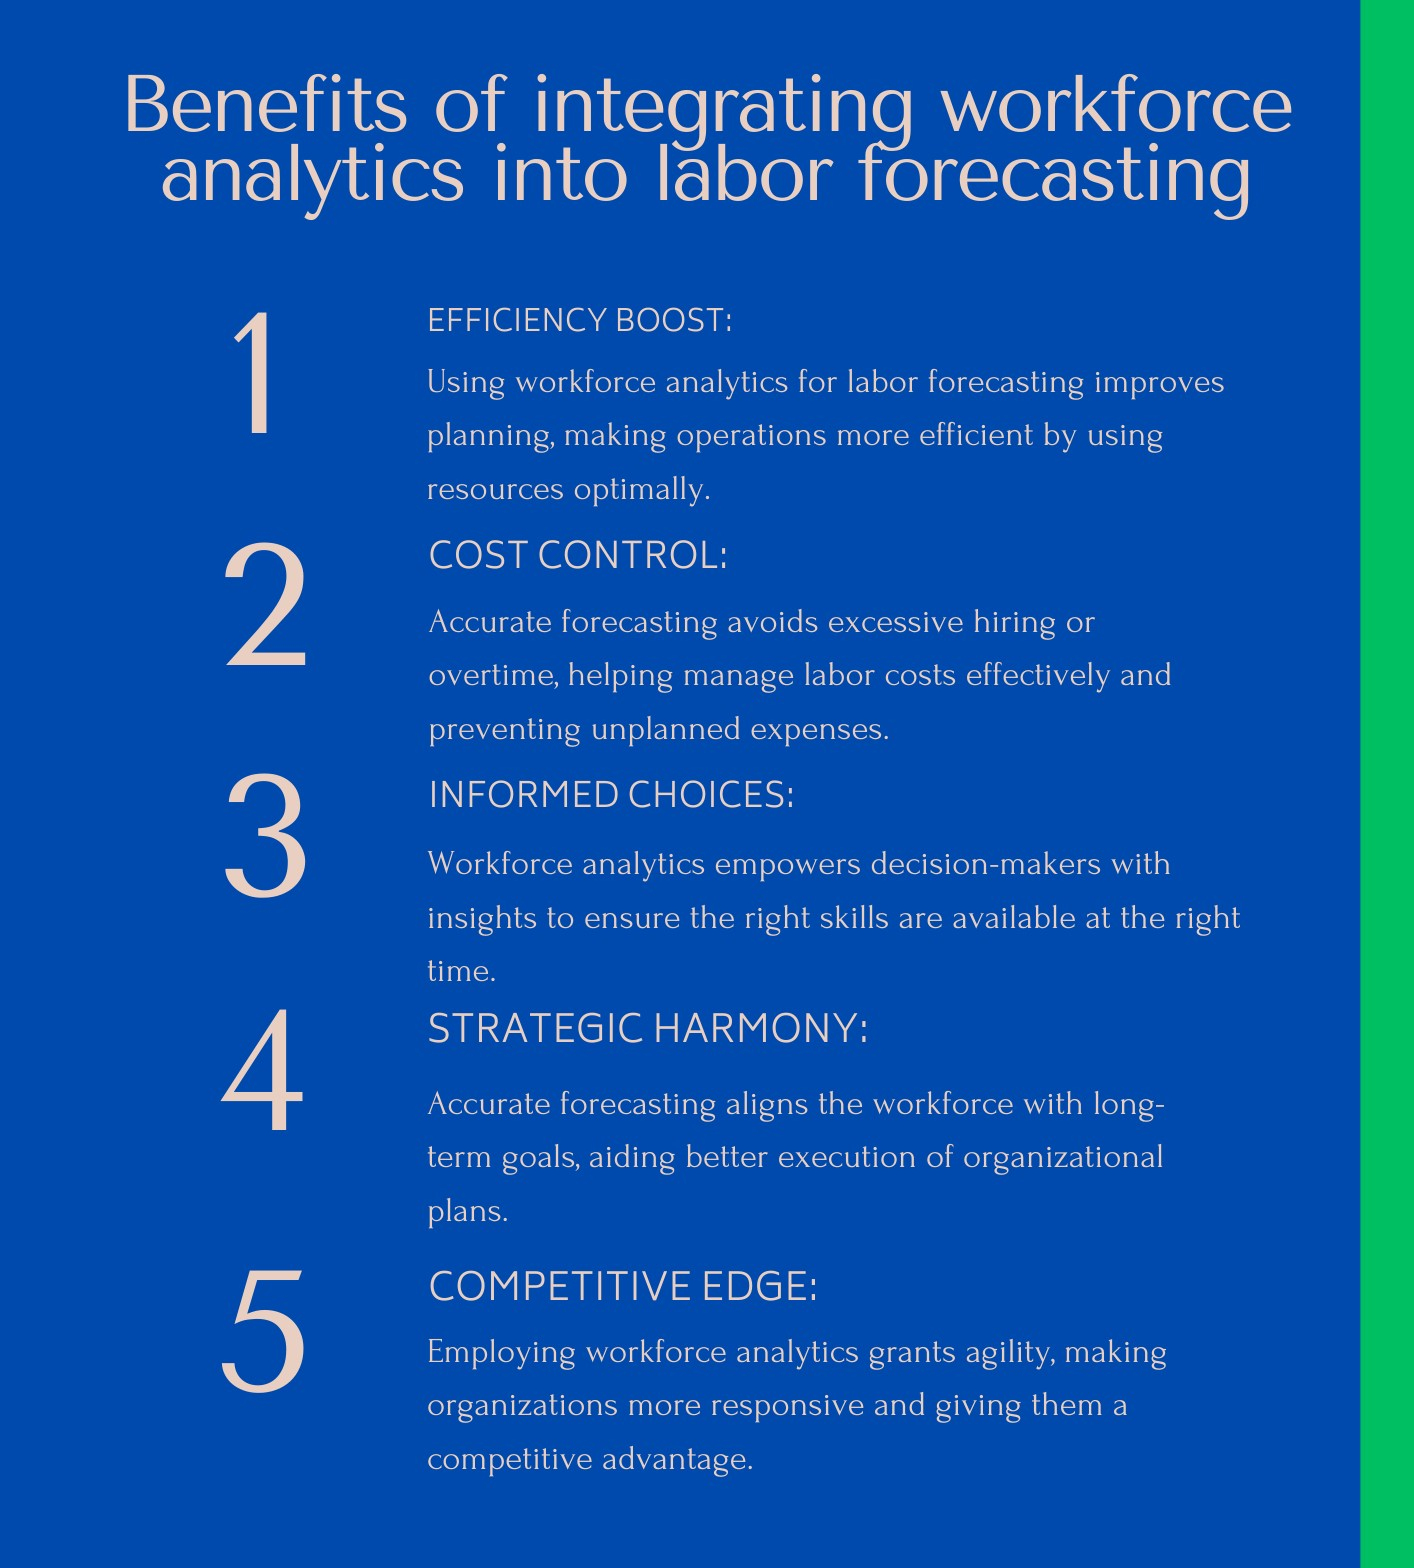 How Can Workforce Analytics Be Used To Forecast Labor Demand